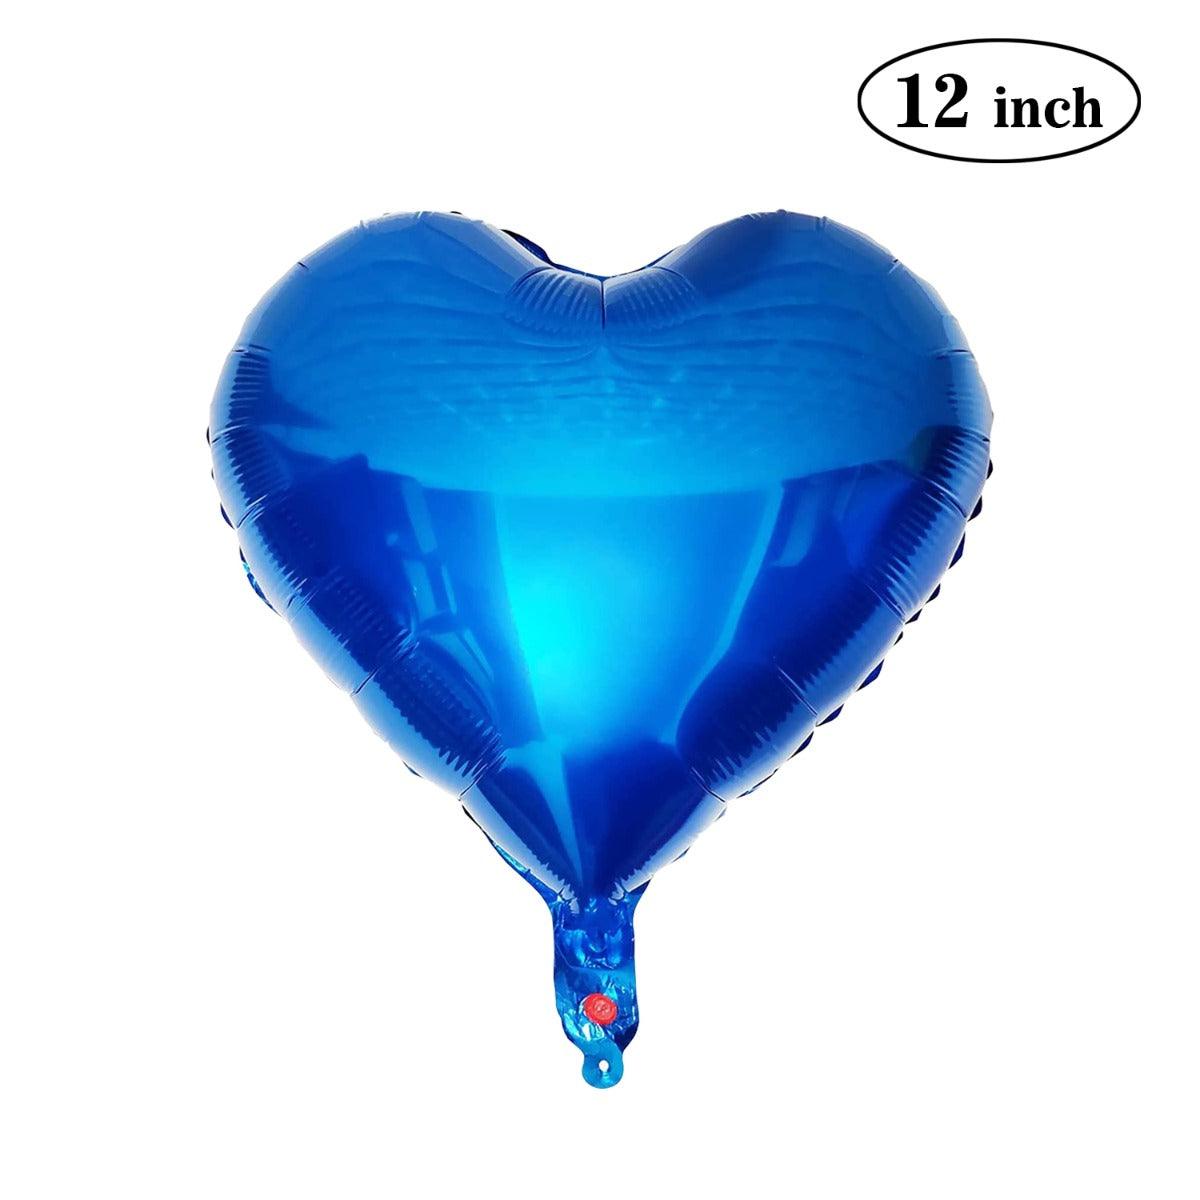 PartyCorp 12 Inch Blue Heart Foil Balloon, 1 pc